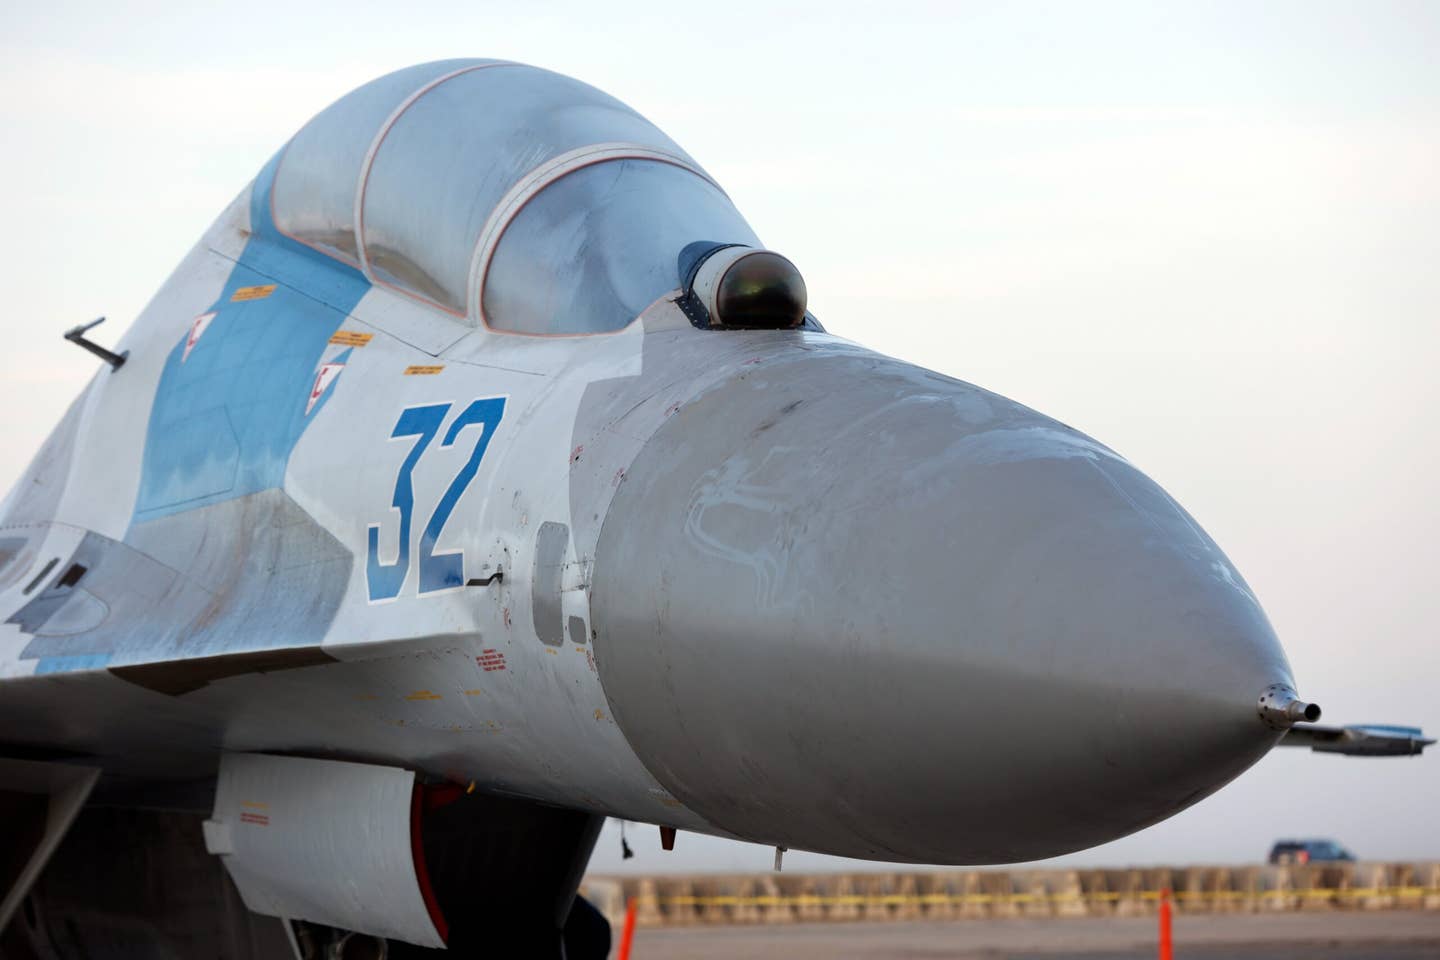 The nose of the Su-27 pictured during its arrival at the National Museum of the U.S. Air Force in September. <em>National Museum of the U.S. Air Force</em>